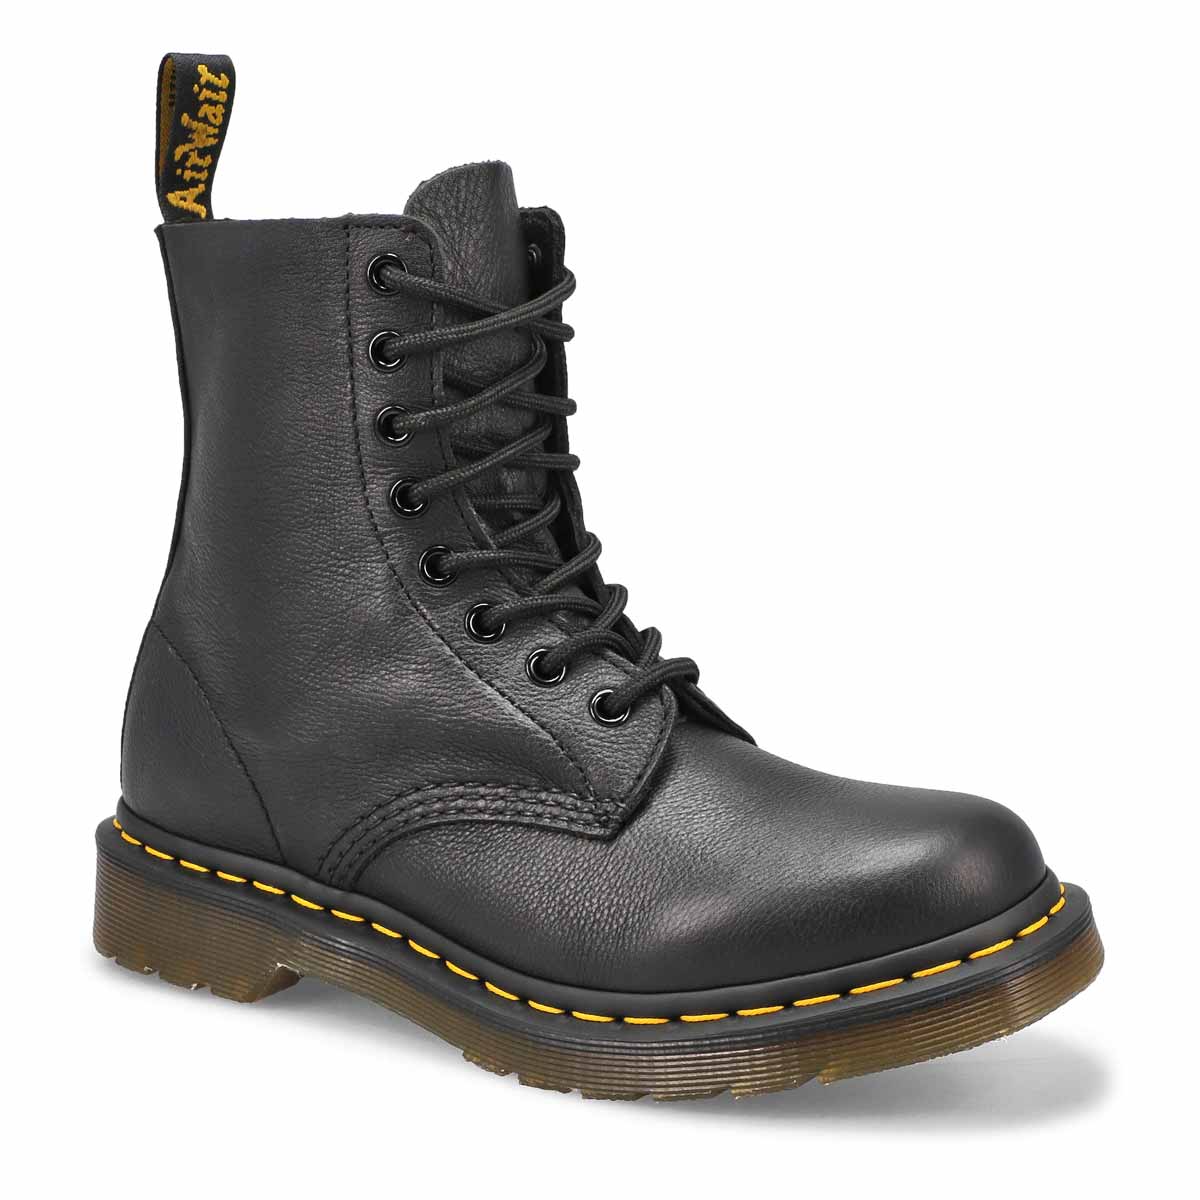 Buy > softest leather dr martens > in stock